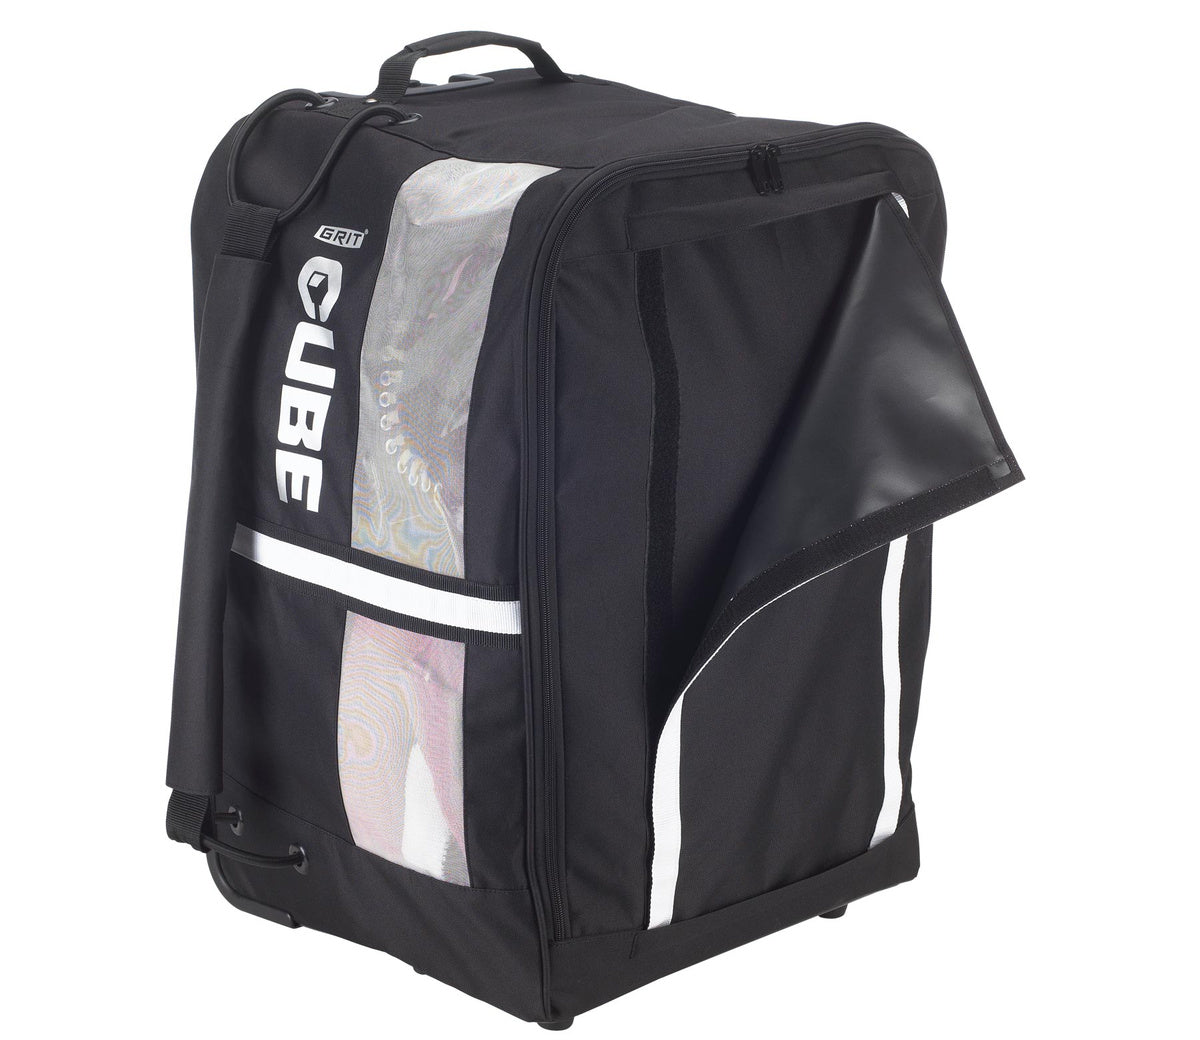 Ice hockey bag with wheels Grit Cube junior 26 inches